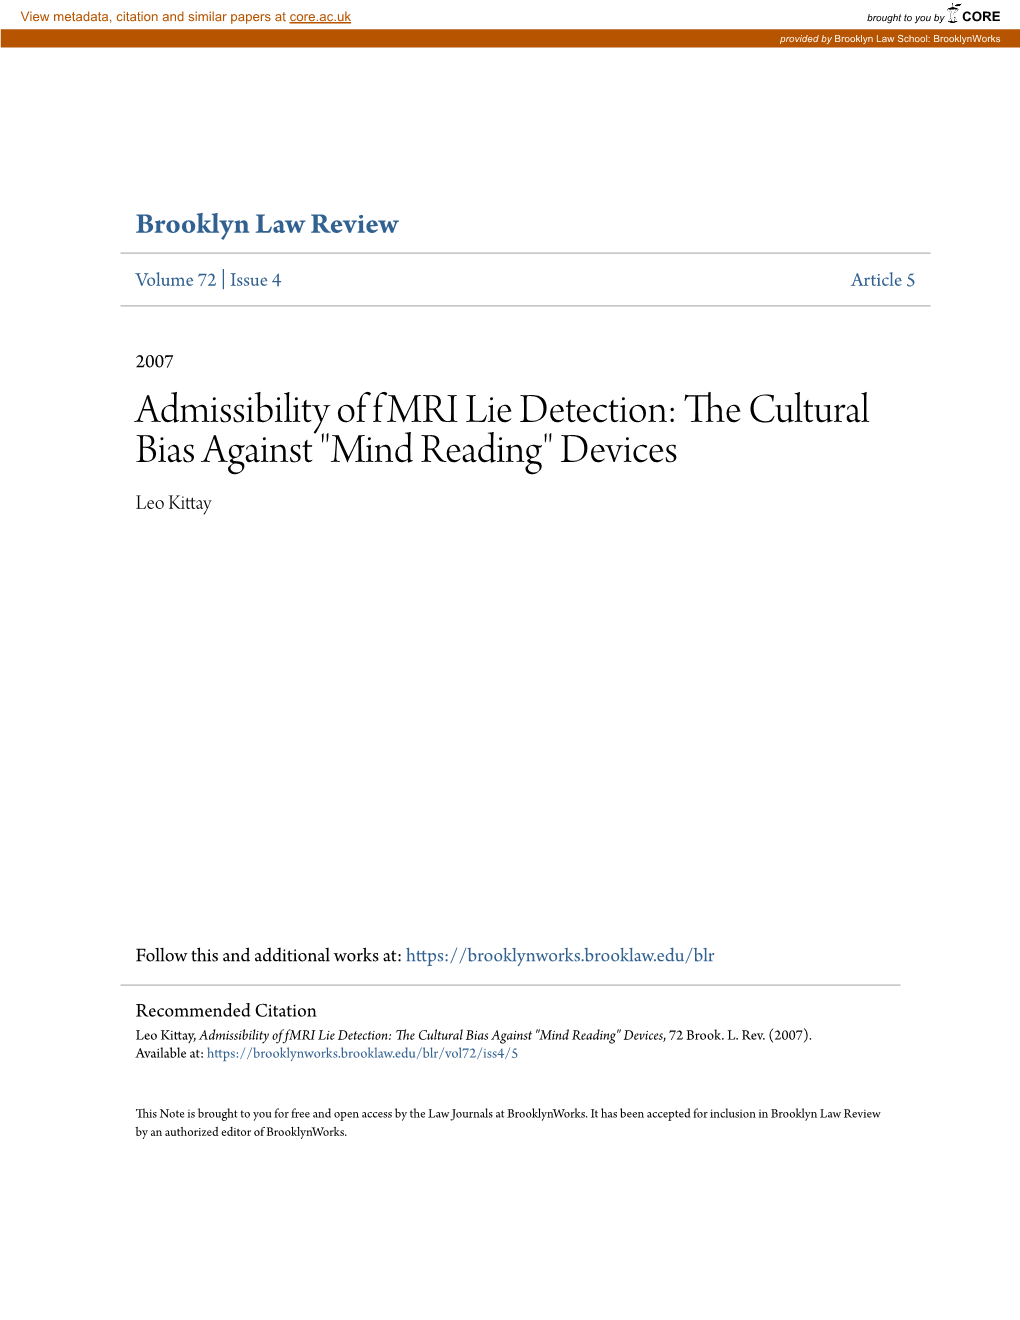 Admissibility of Fmri Lie Detection: the Ulturc Al Bias Against "Mind Reading" Devices Leo Kittay